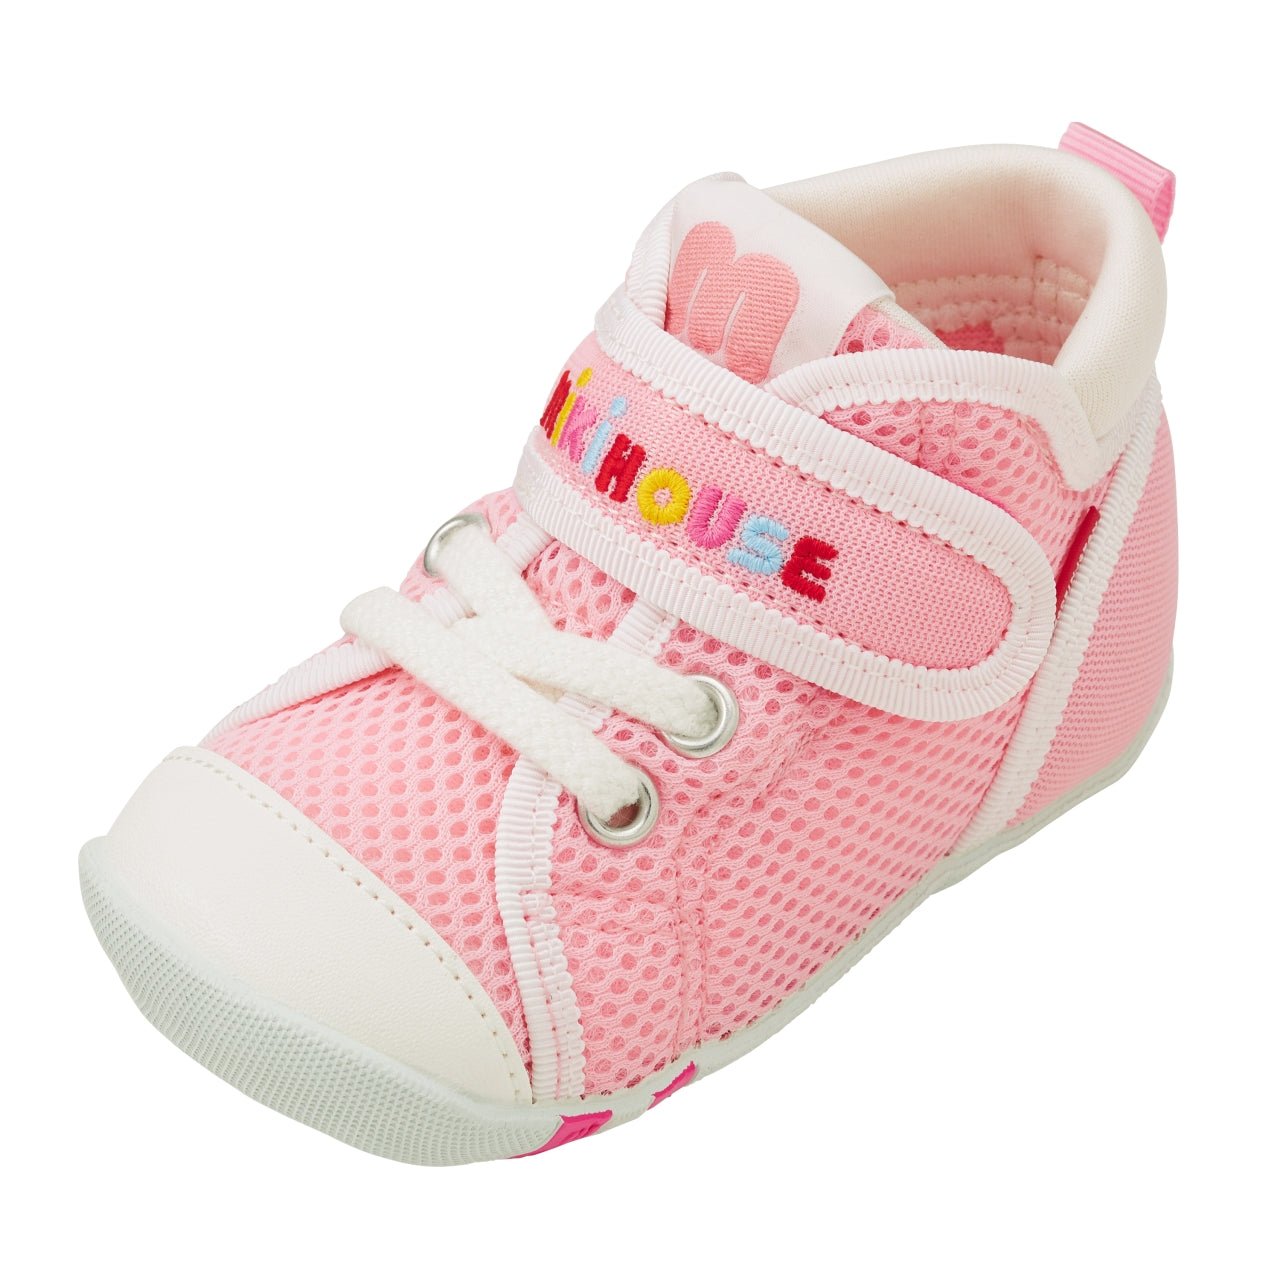 Double Russell Mesh First Walker Shoes - Strawberry Milk